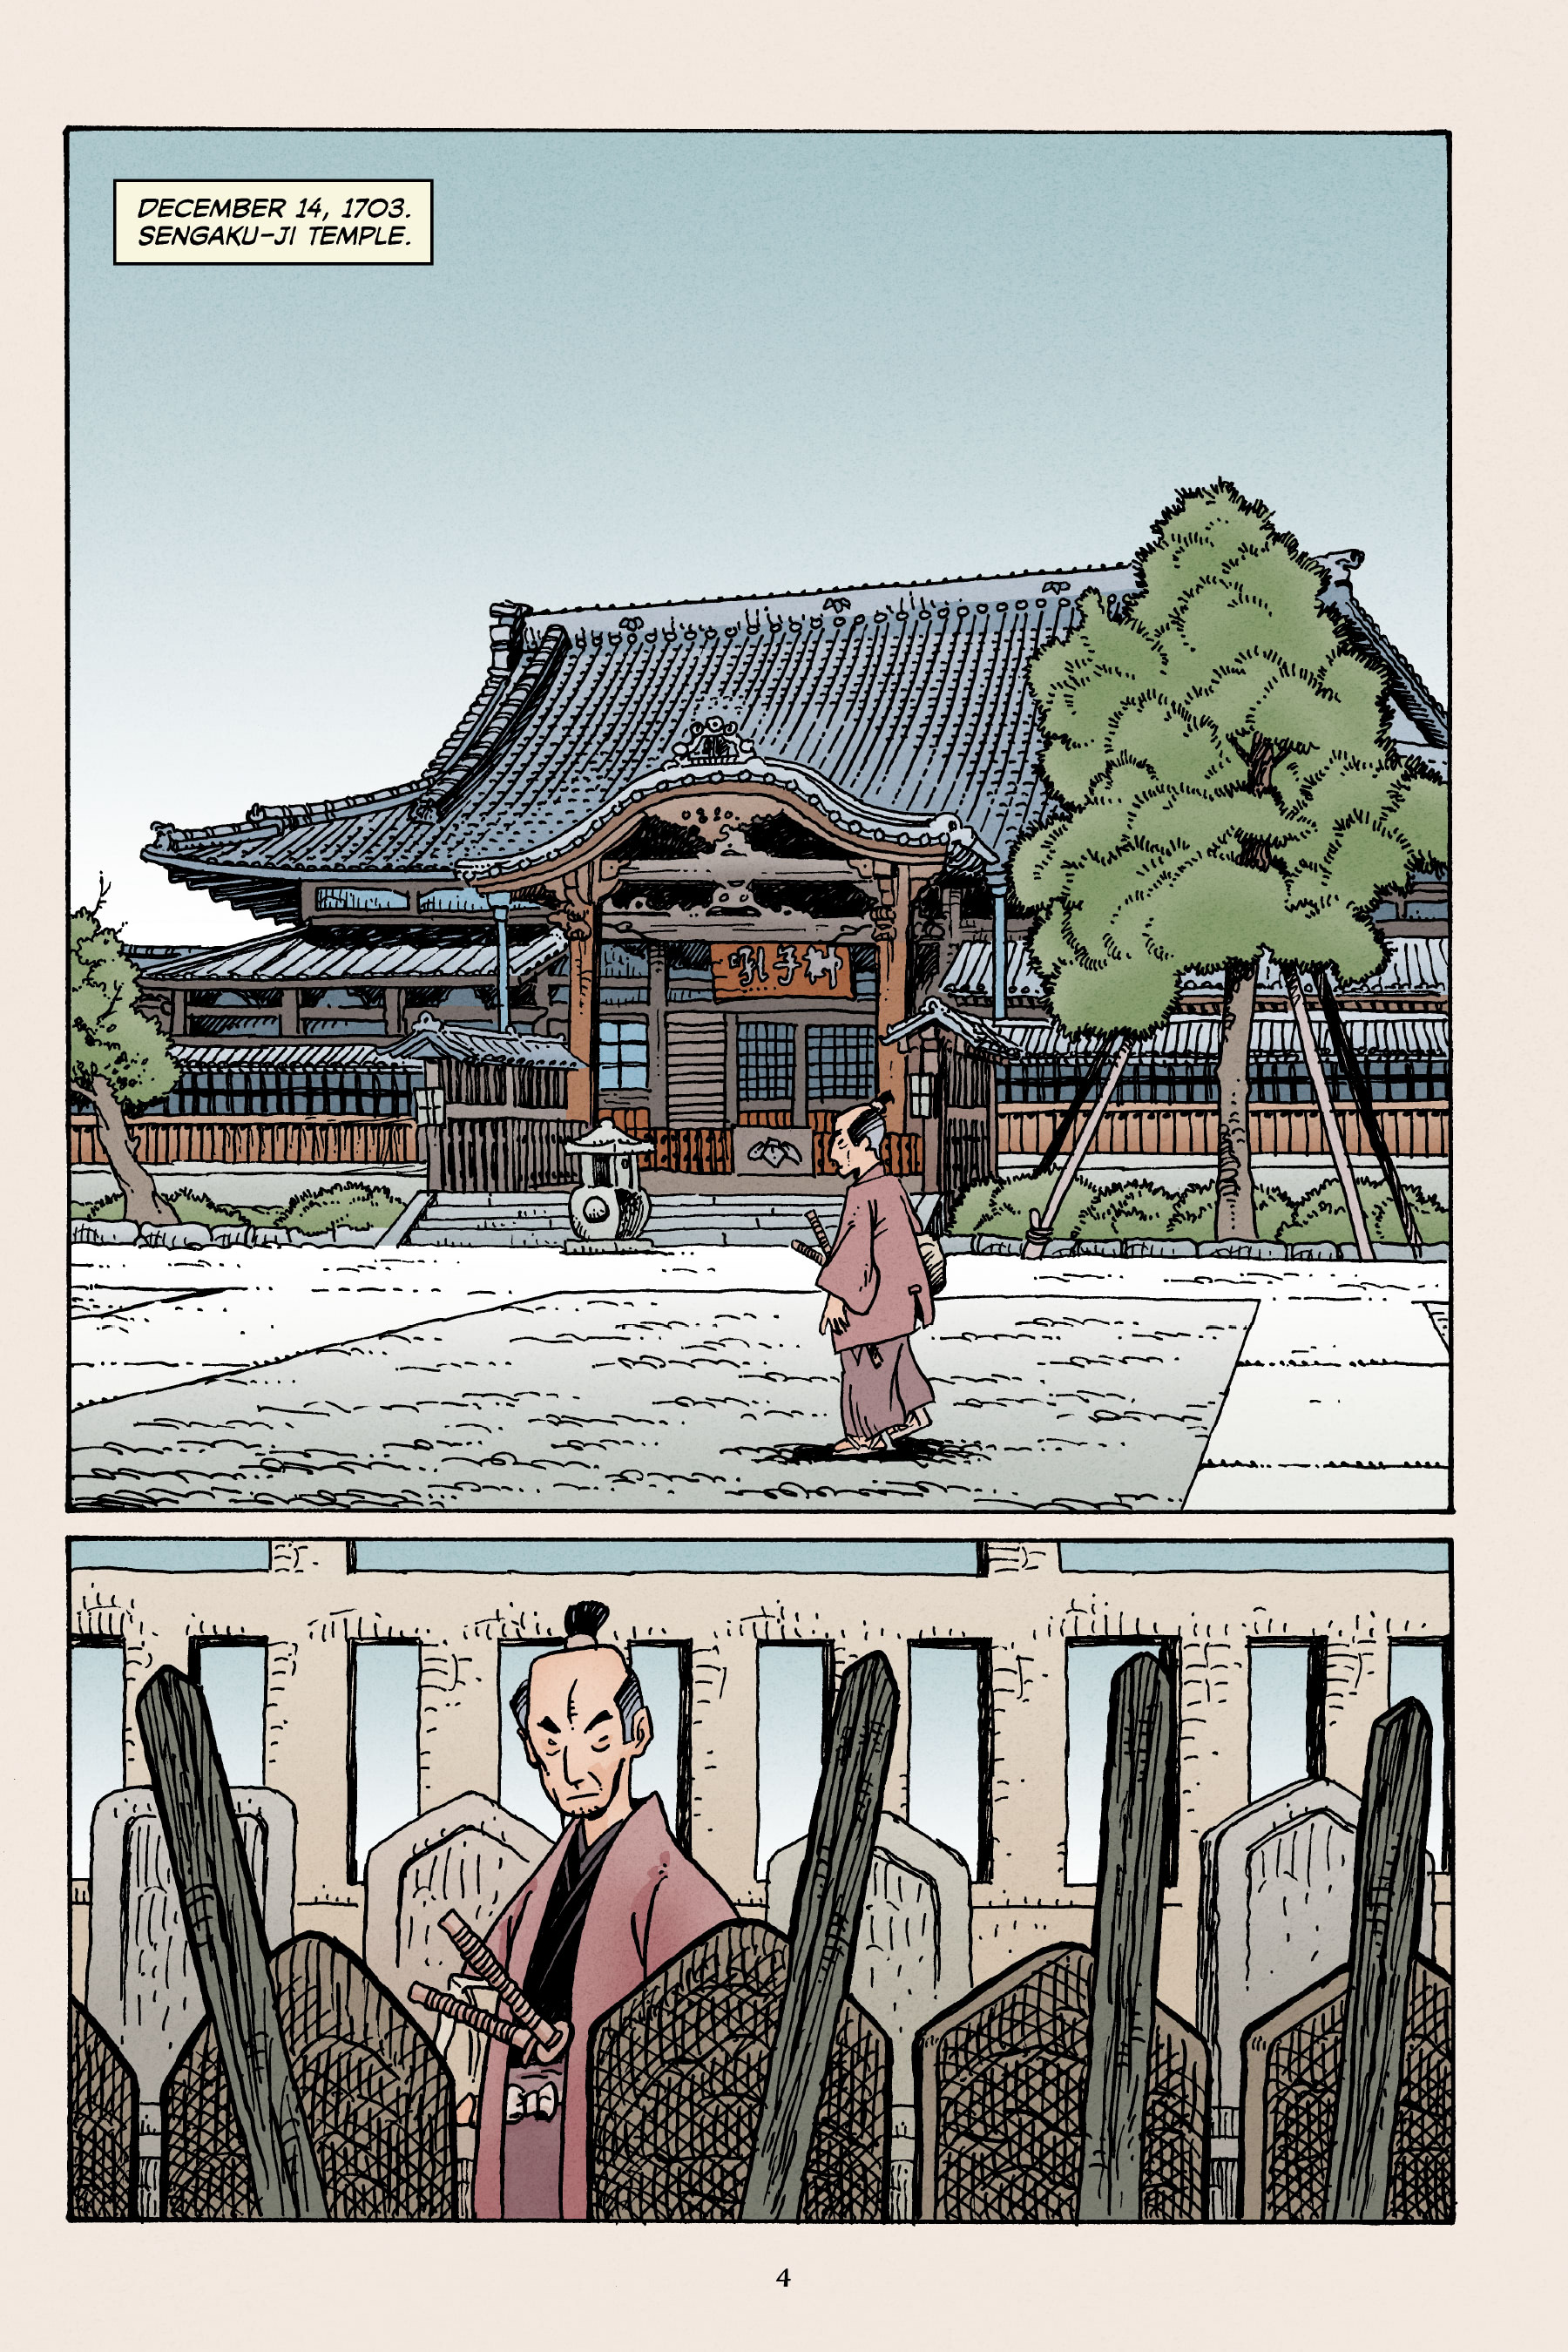 47 Ronin (2021): Chapter GN - Page 5